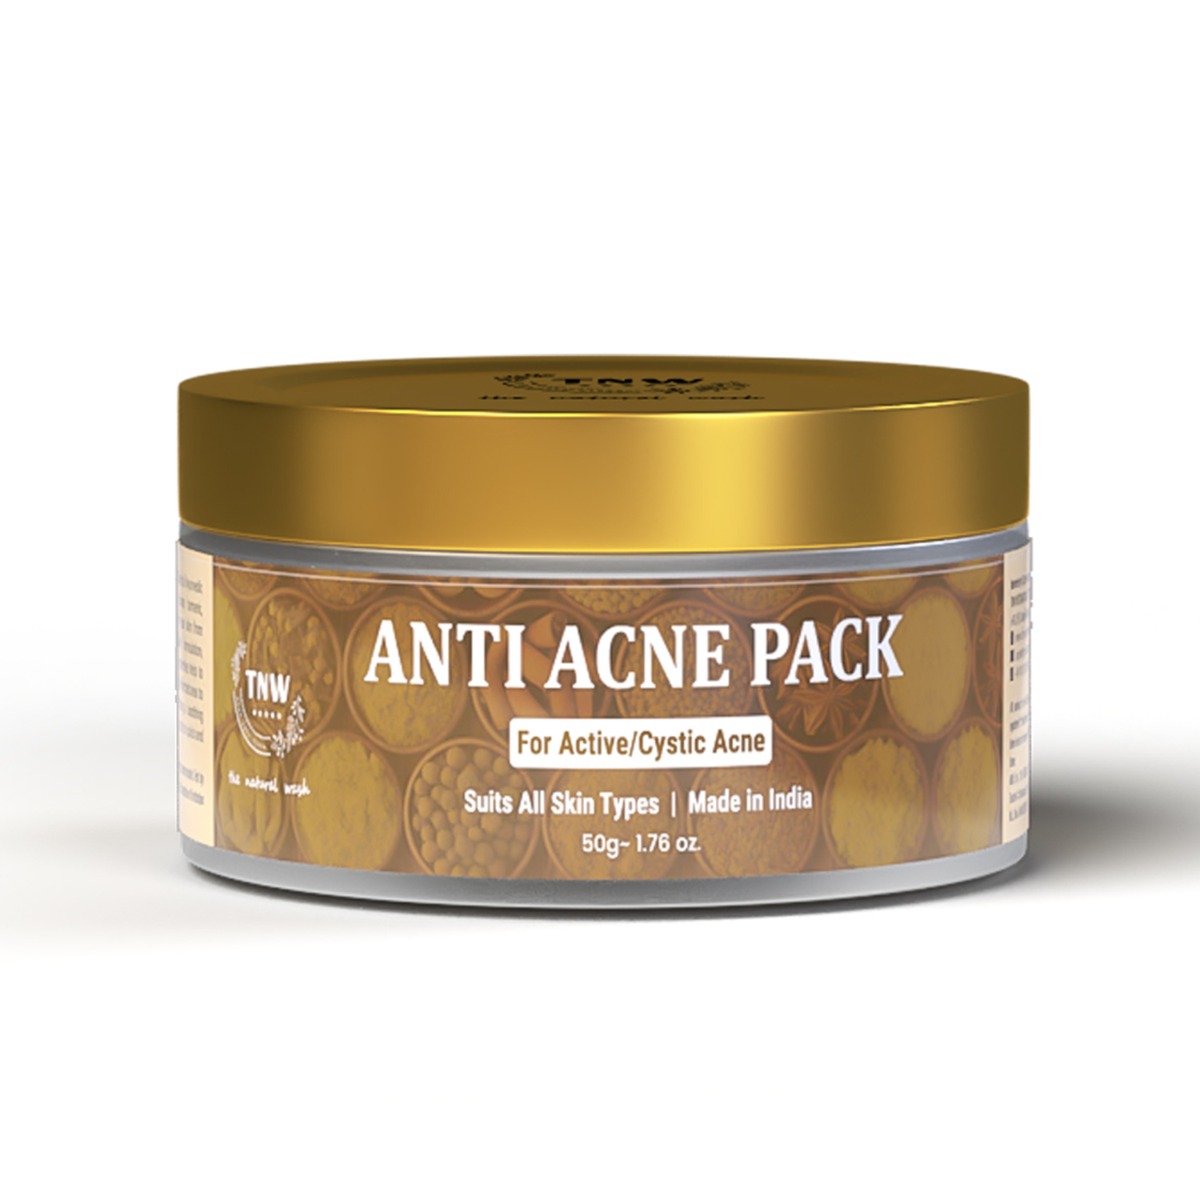 TNW - The Natural Wash Anti Acne Pack For Cystic & Active Acne, 50gm